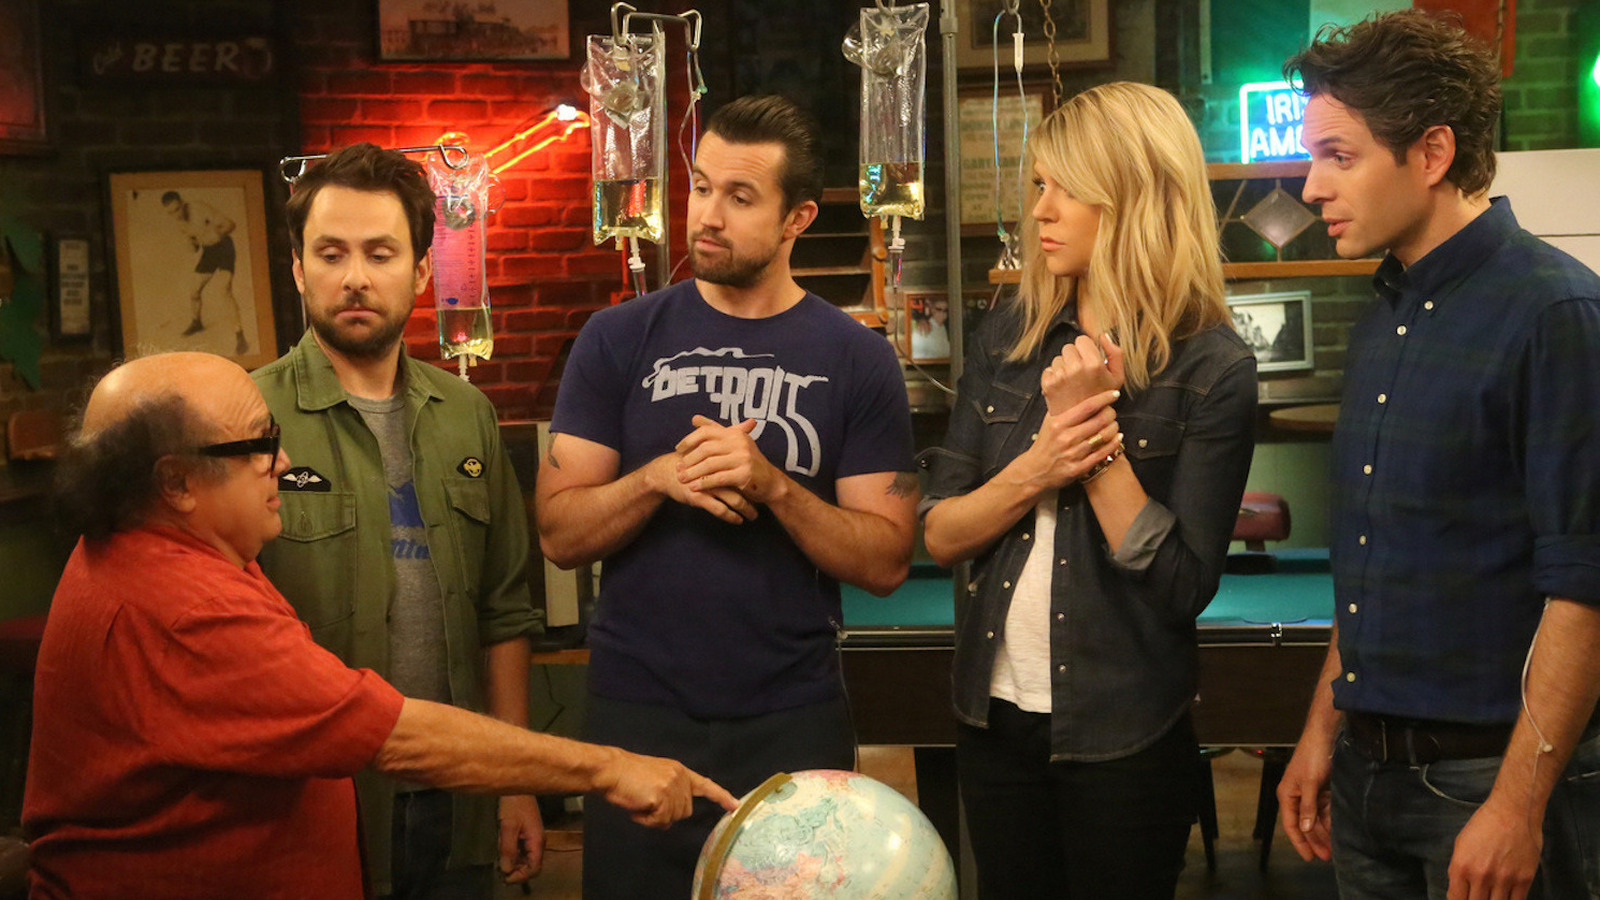 Always Sunny: Charlie Day Thinks He Has What It Takes to Take Over SNL